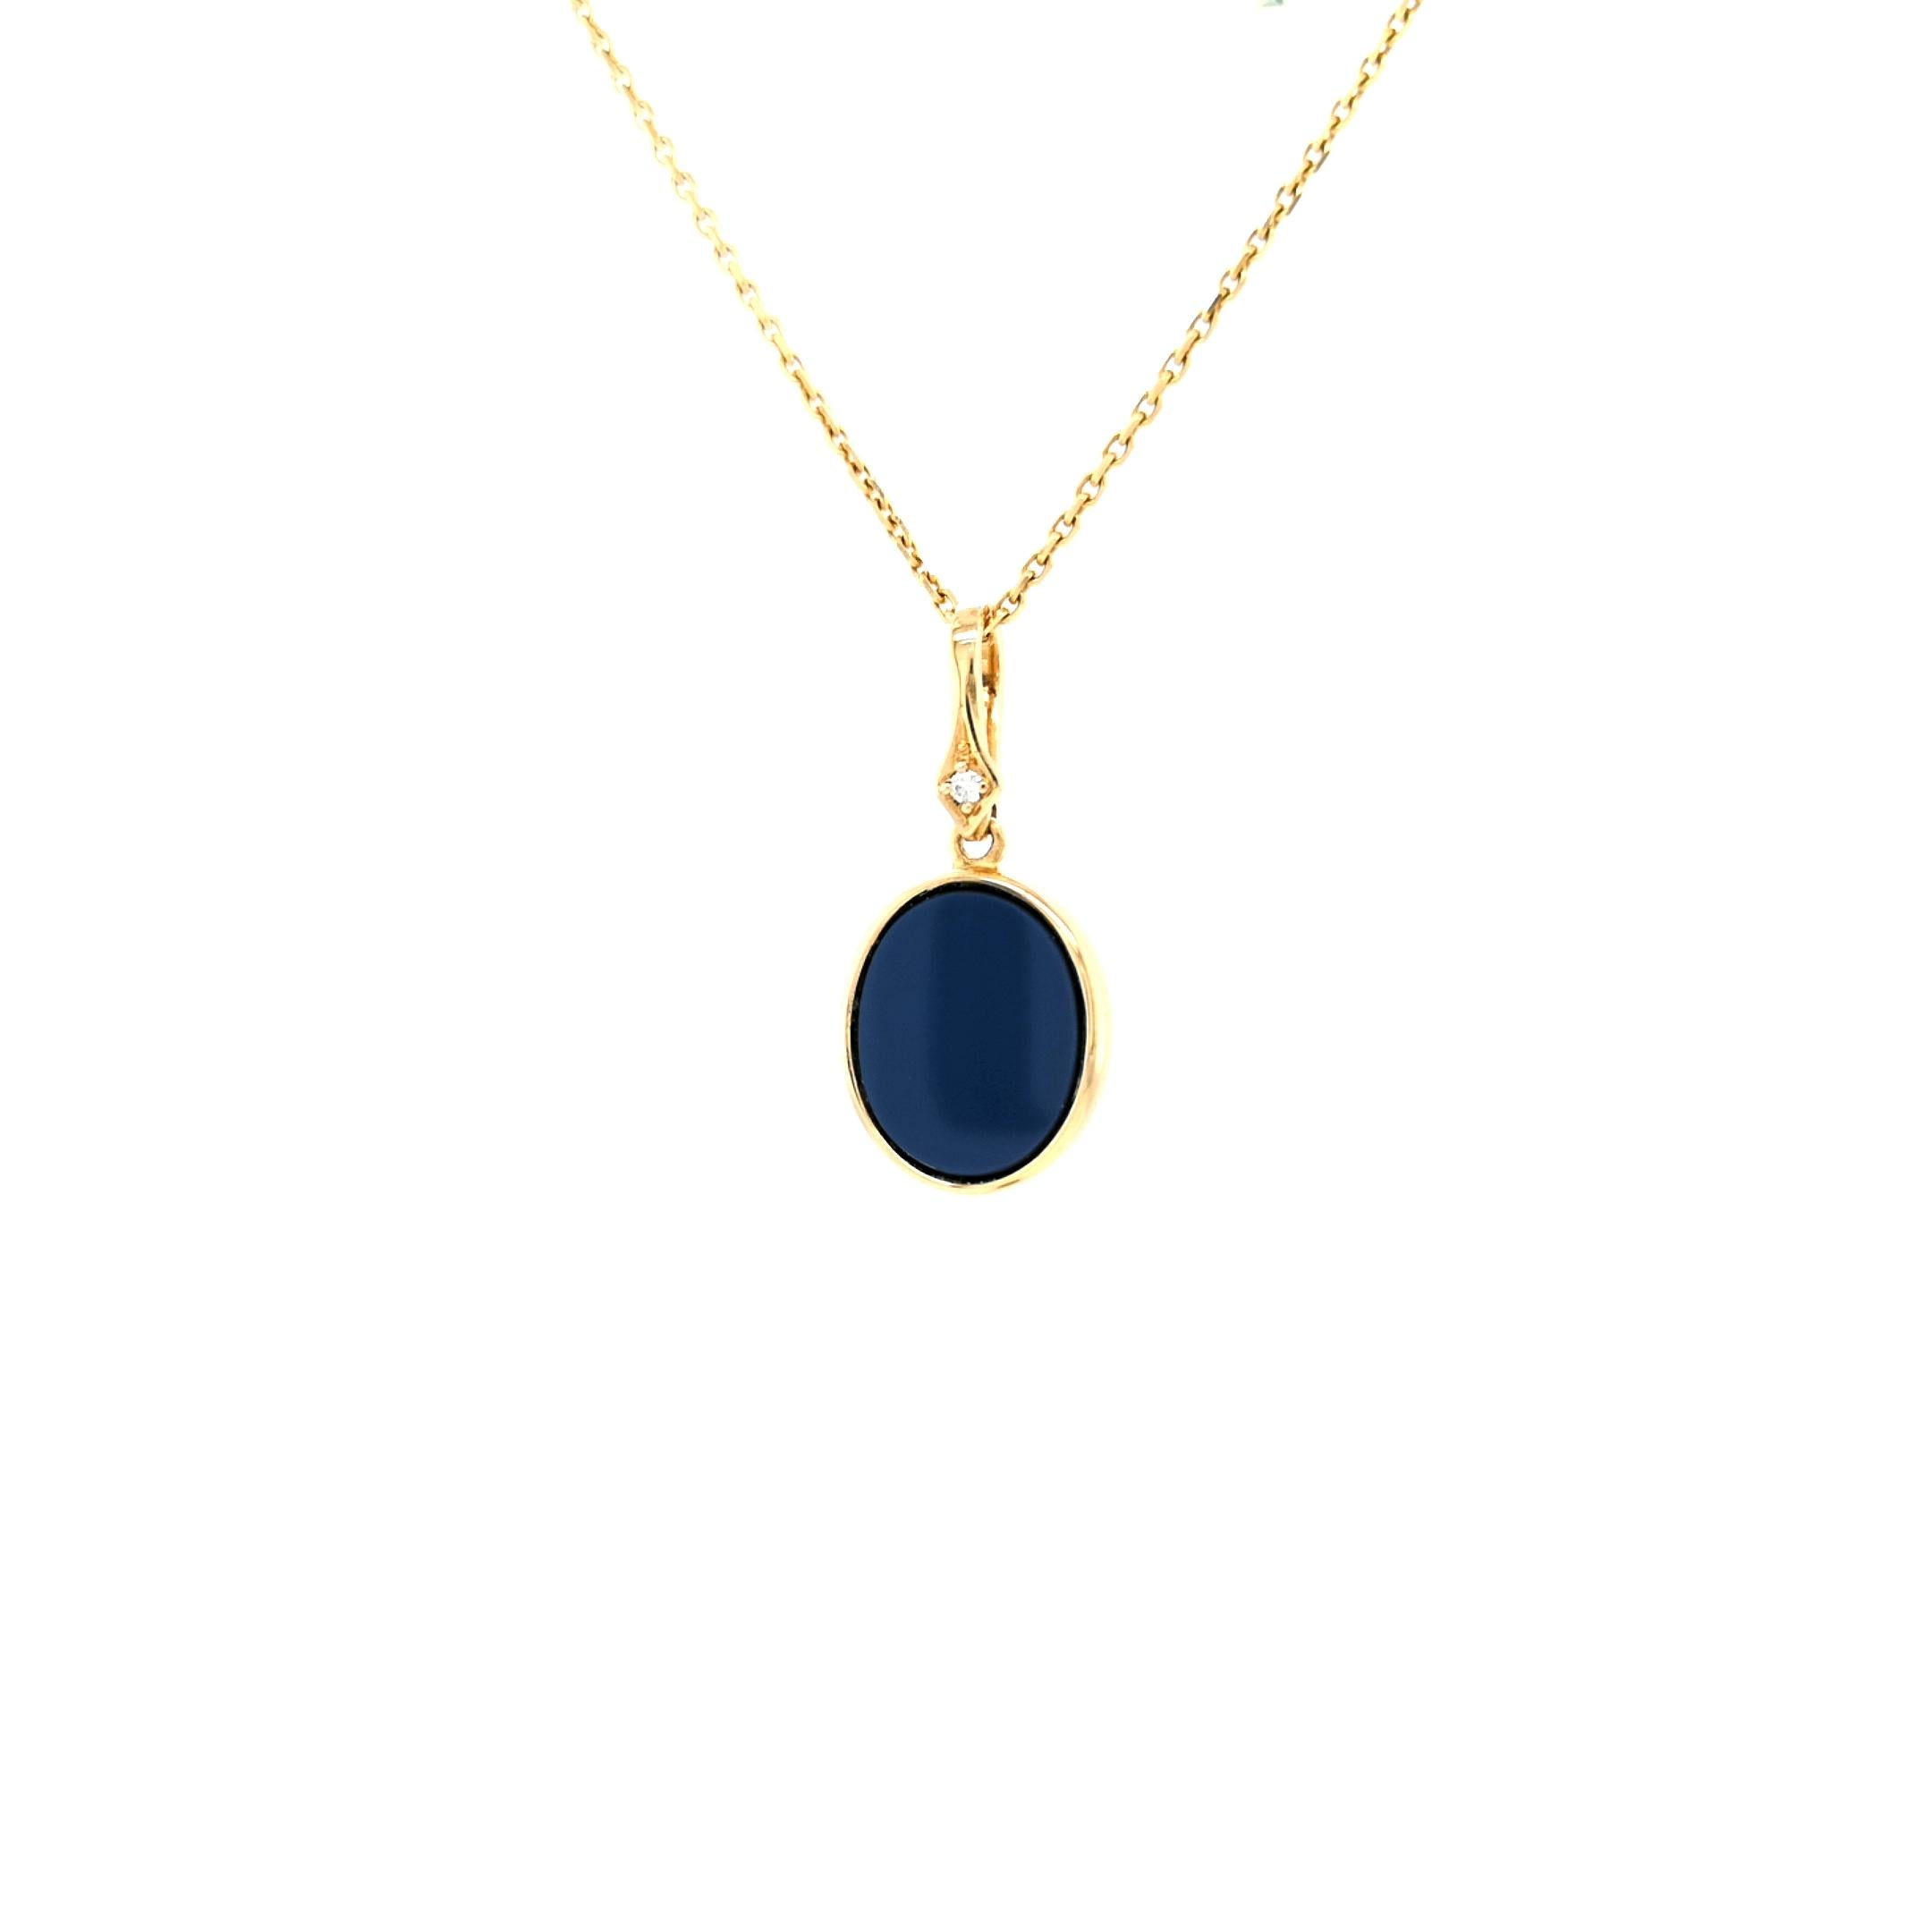 Oval Pendant Necklace 18k Yellow Gold 1 Diamond 0.02 ct G VS Blue Layered Onyx For Sale 3